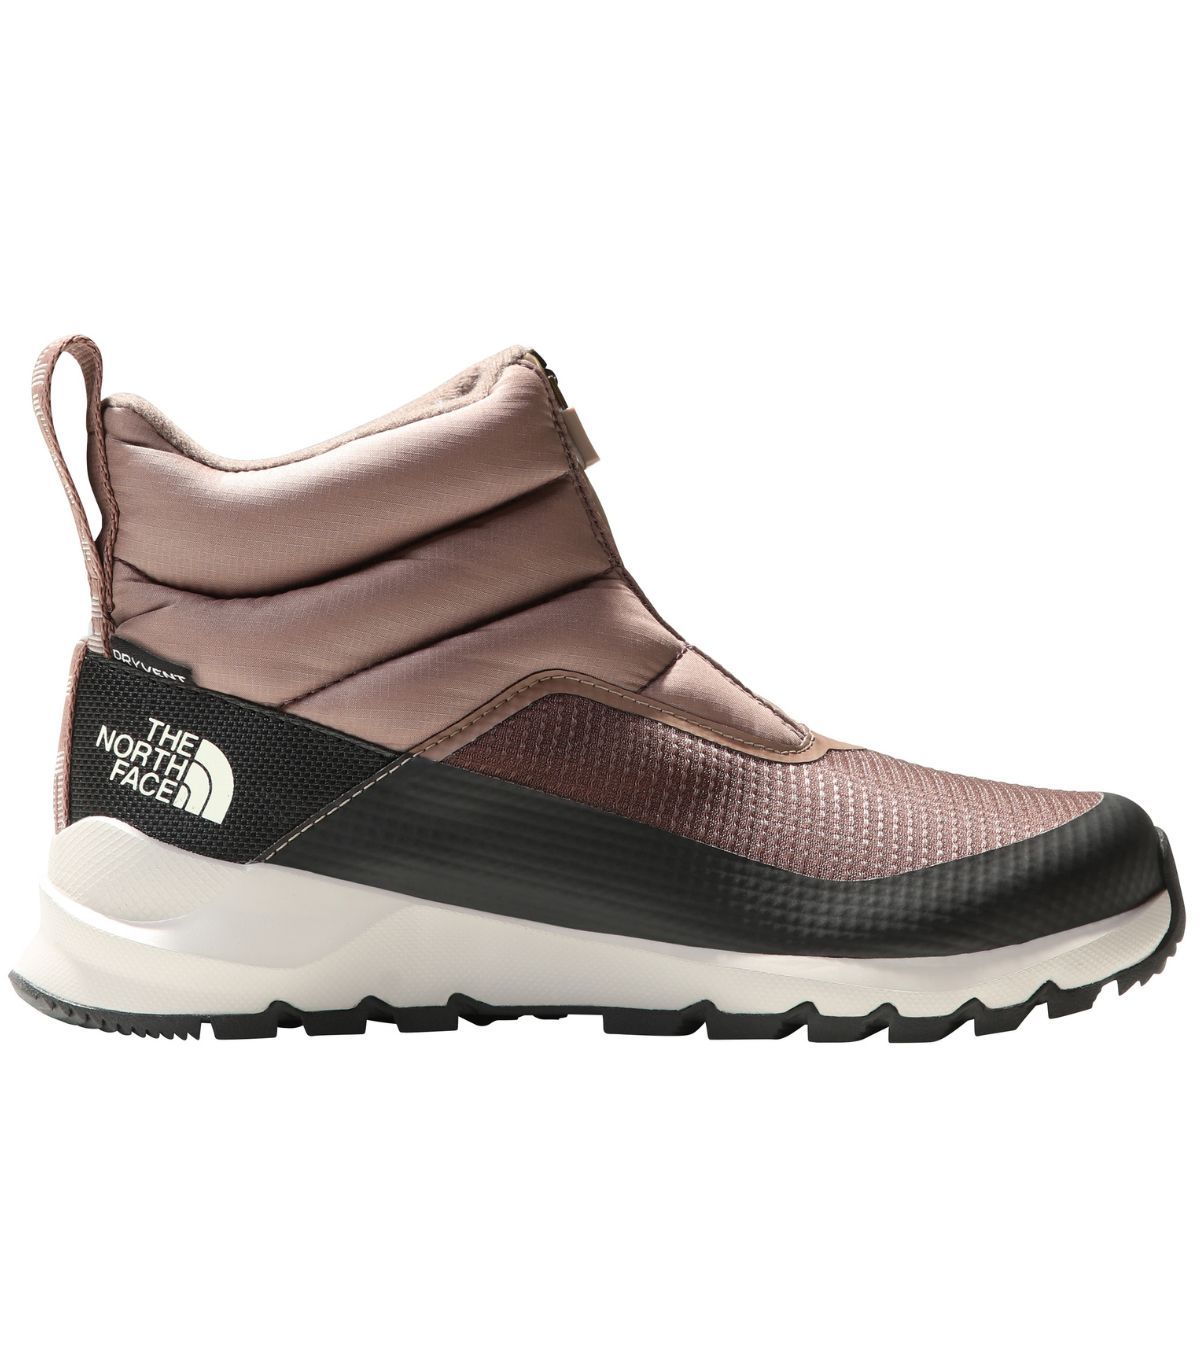 Botas The North Face Thermoball Progressive Zip II Mujer Deep Taupe. Oferta comprar